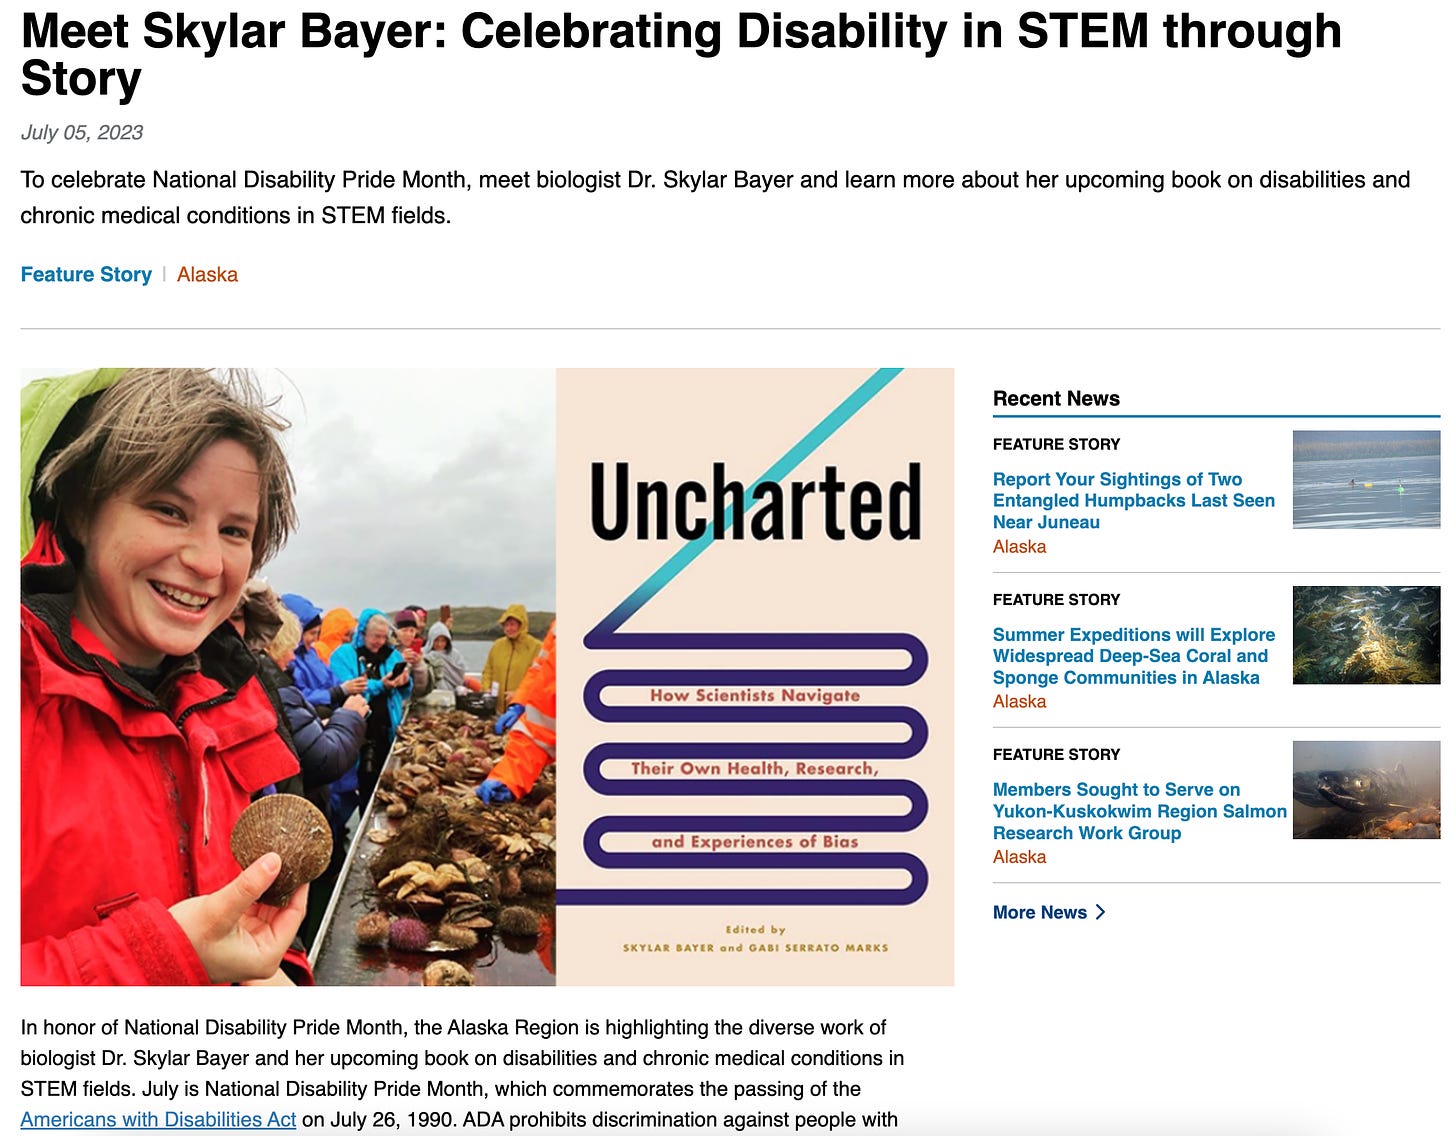 Screenshot of NOAA fisheries feature article with an image of Skylar and the Uncharted cover. The headline reads "Meet Skylar Bayer: Celebrating Disability in STEM through Story."